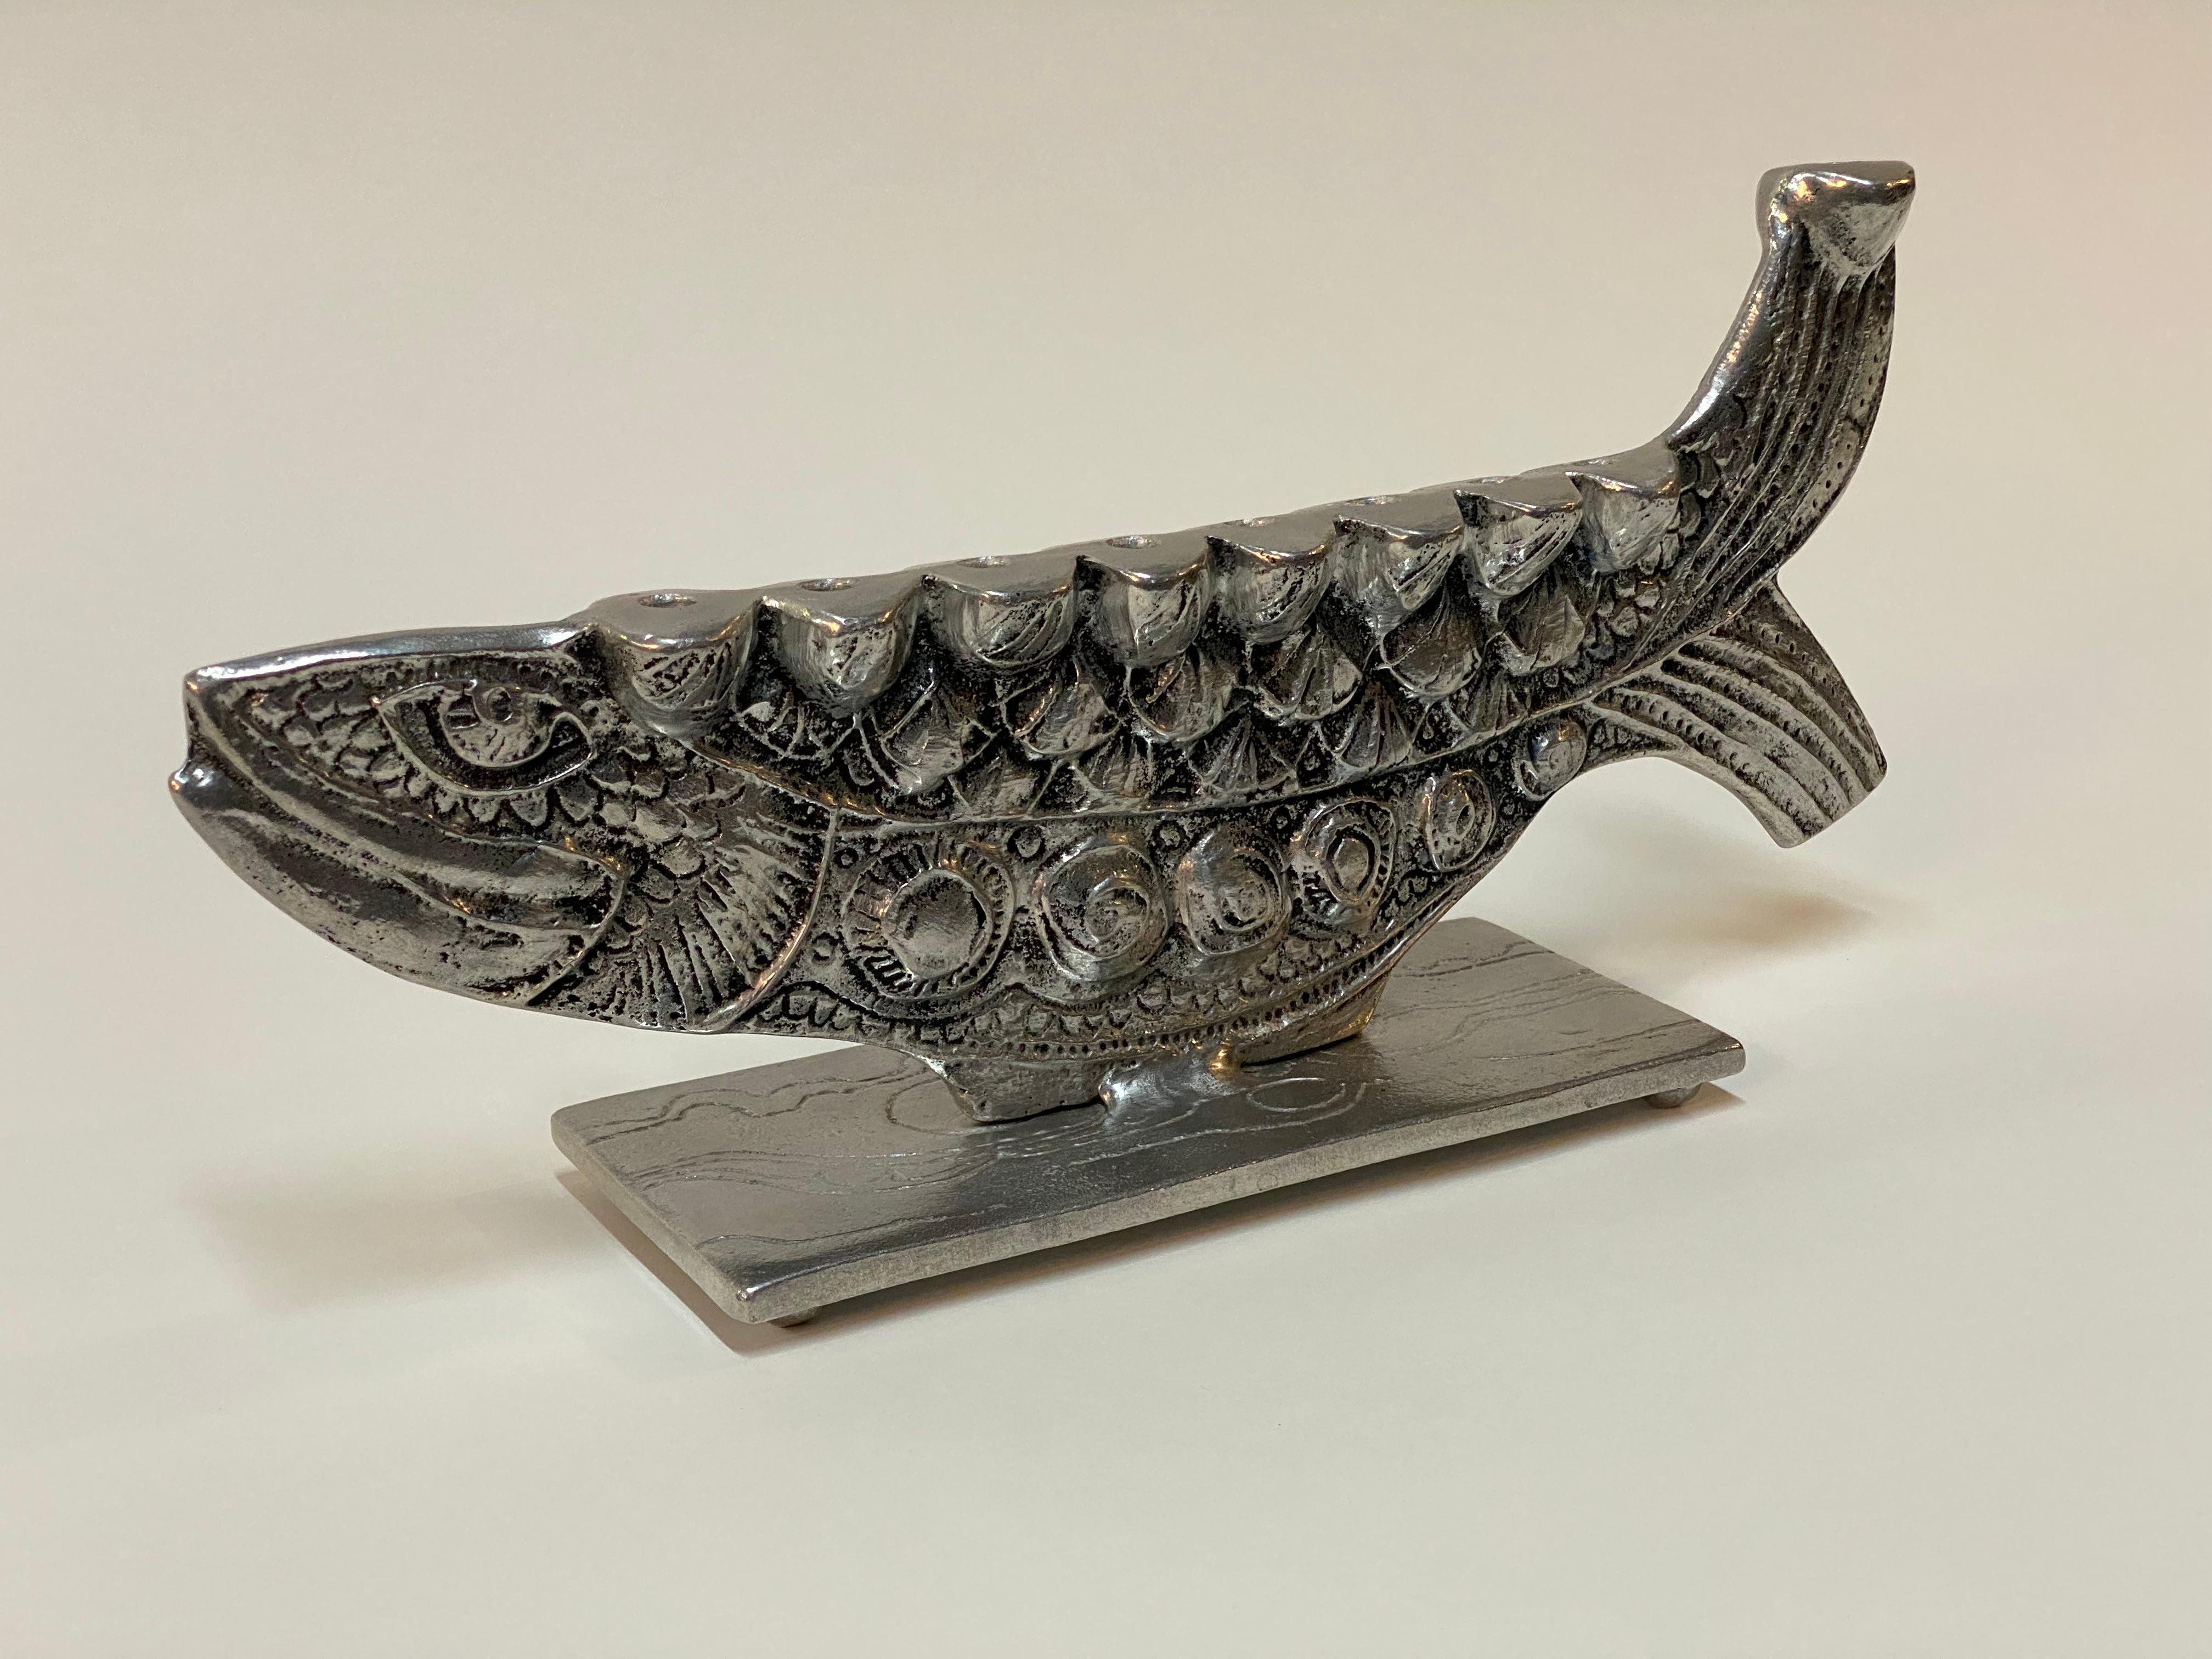 Don Drumm cast aluminum figural fish Menorah. Wonderfully cast detailed brutalist fish. The menorah holds nine skinny tapered candles for Channukah. Signed on the bottom, Drumm. Good condition with no major visible conditions. Wear consistent with